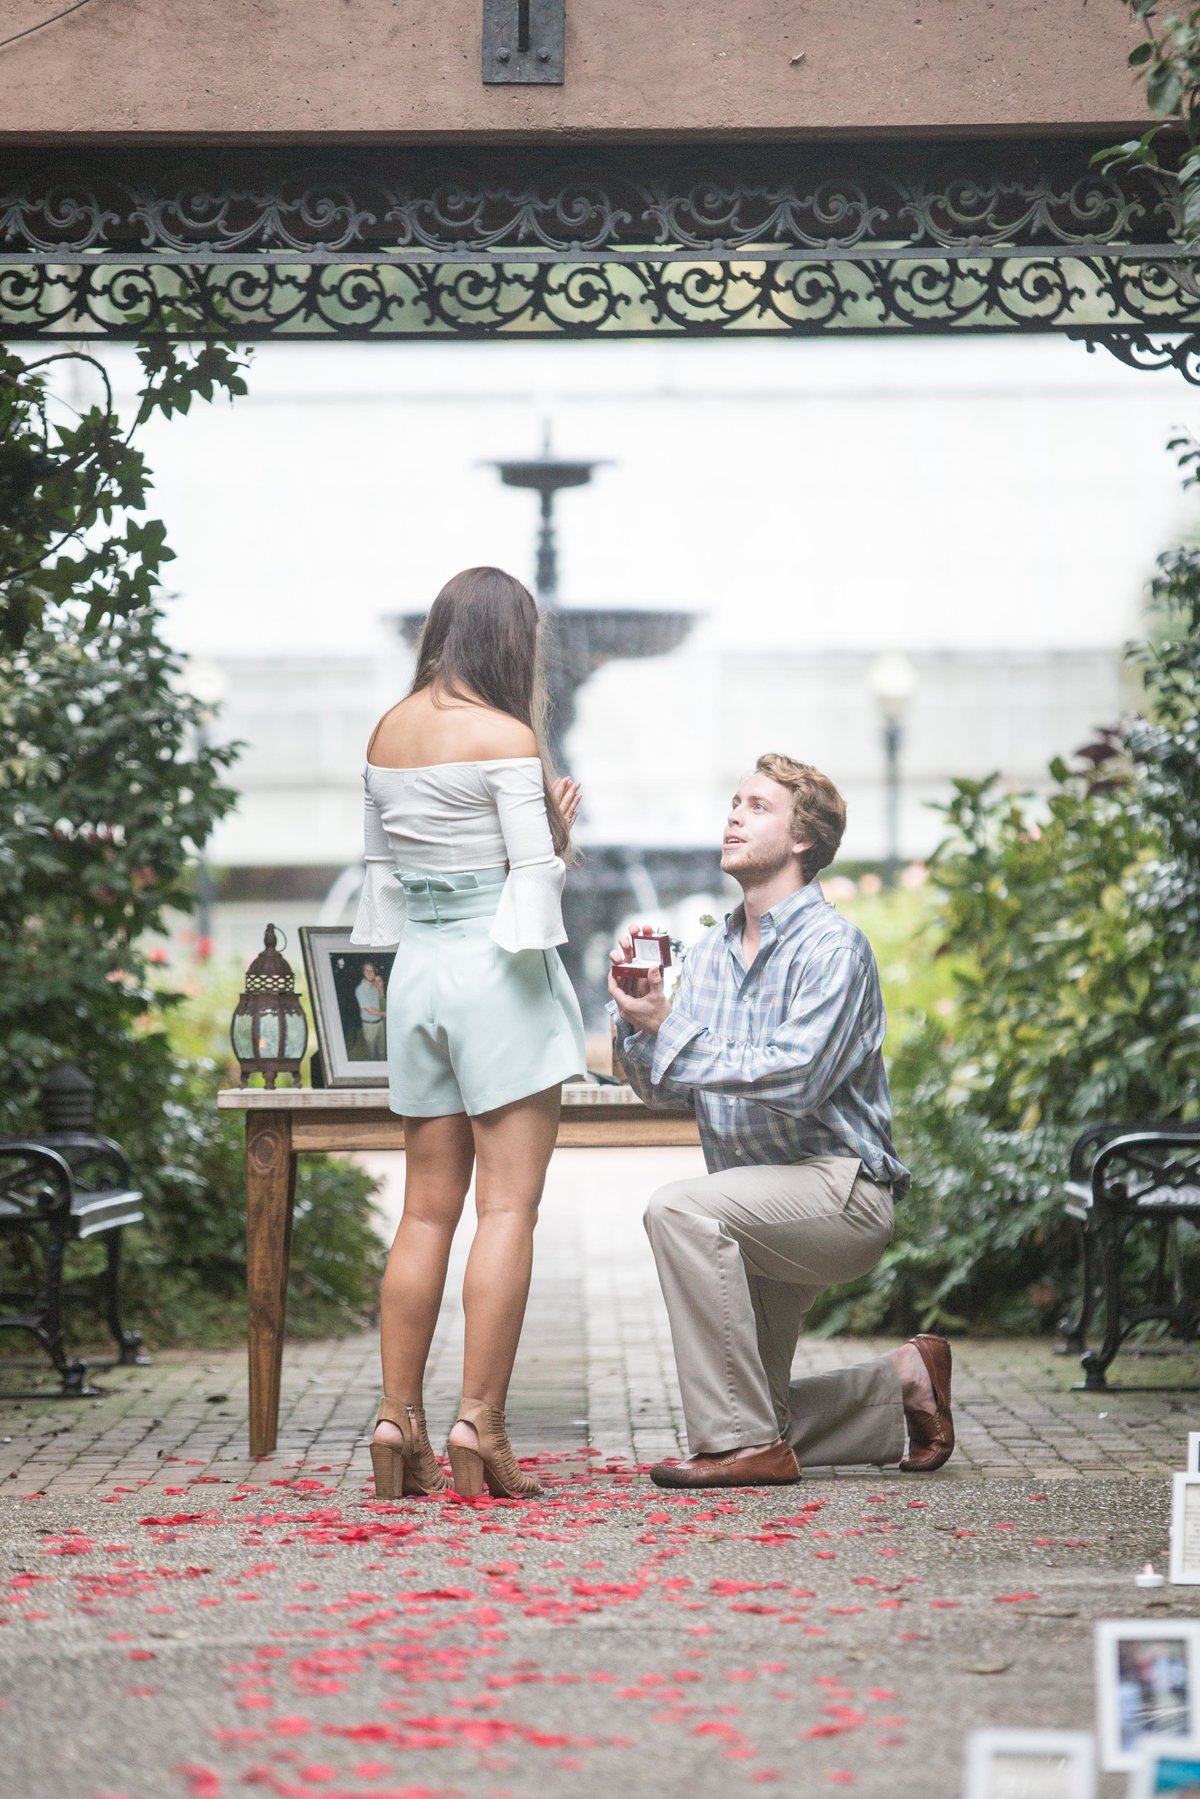 Eric proposes to Katherine on one knee at Bellingrath Gardens in Theodore, Alabama.